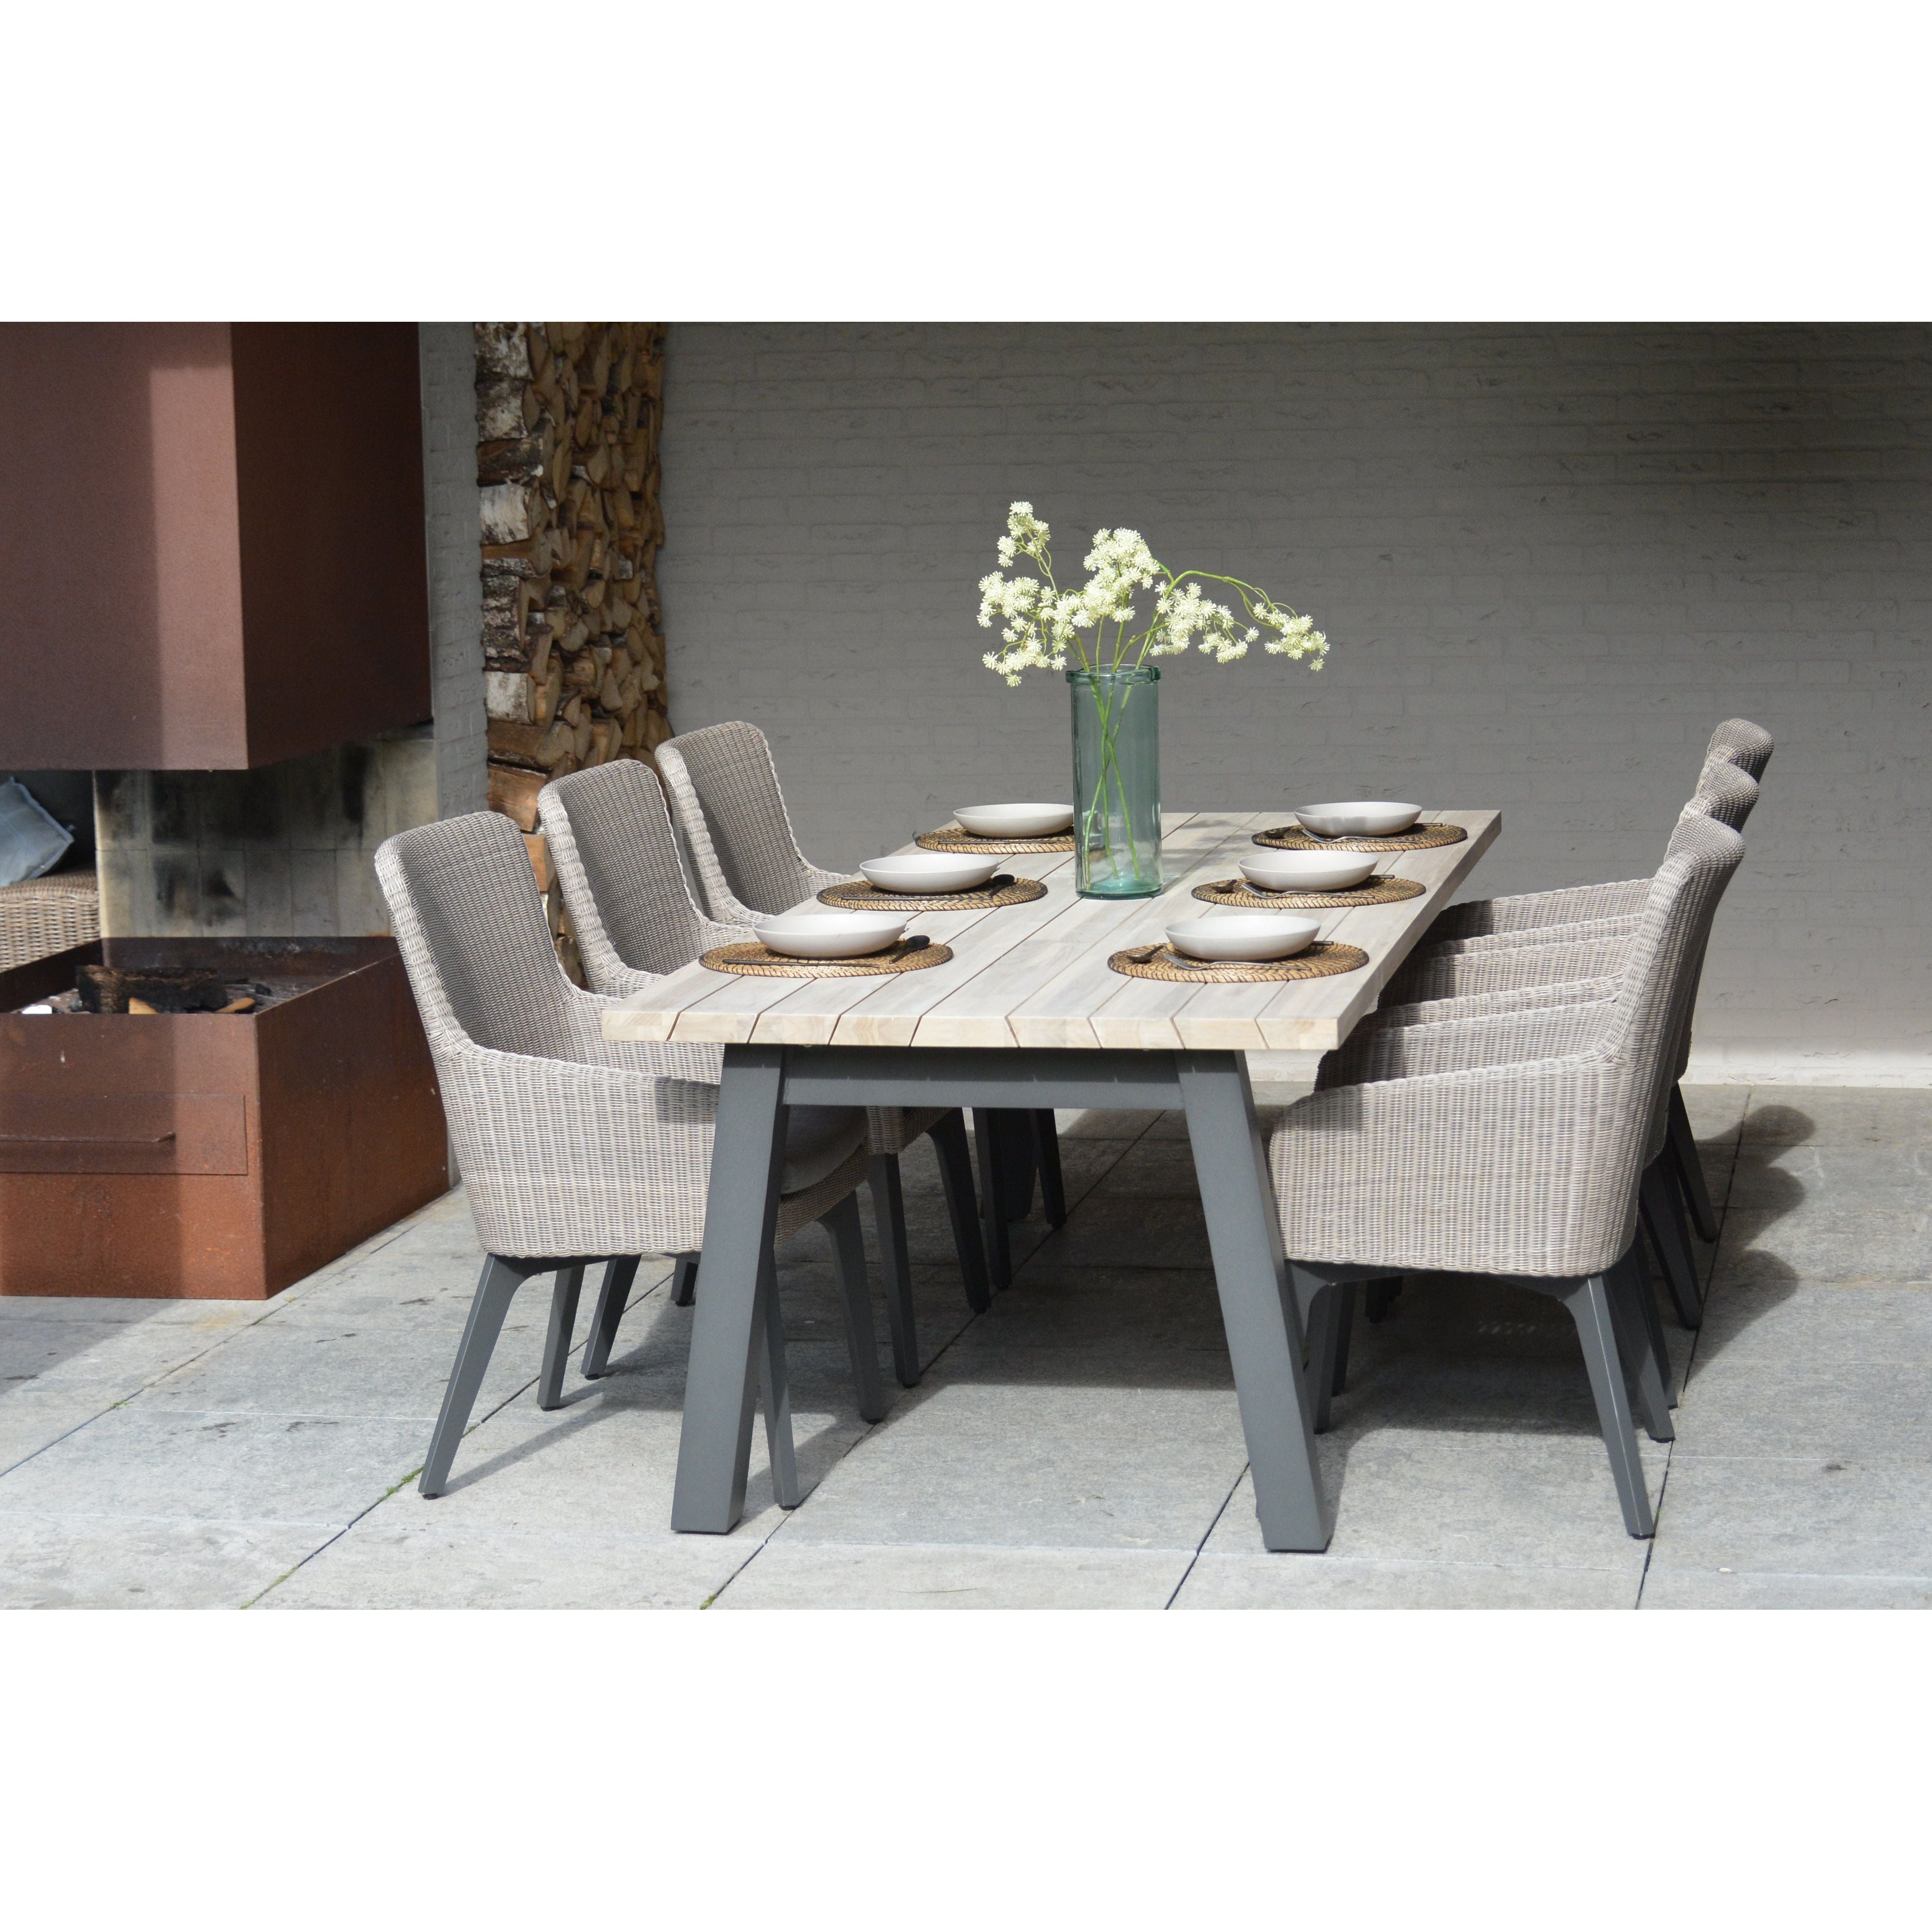 4 Seasons Outdoor Luxor Dining 6 Seat with Derby Table